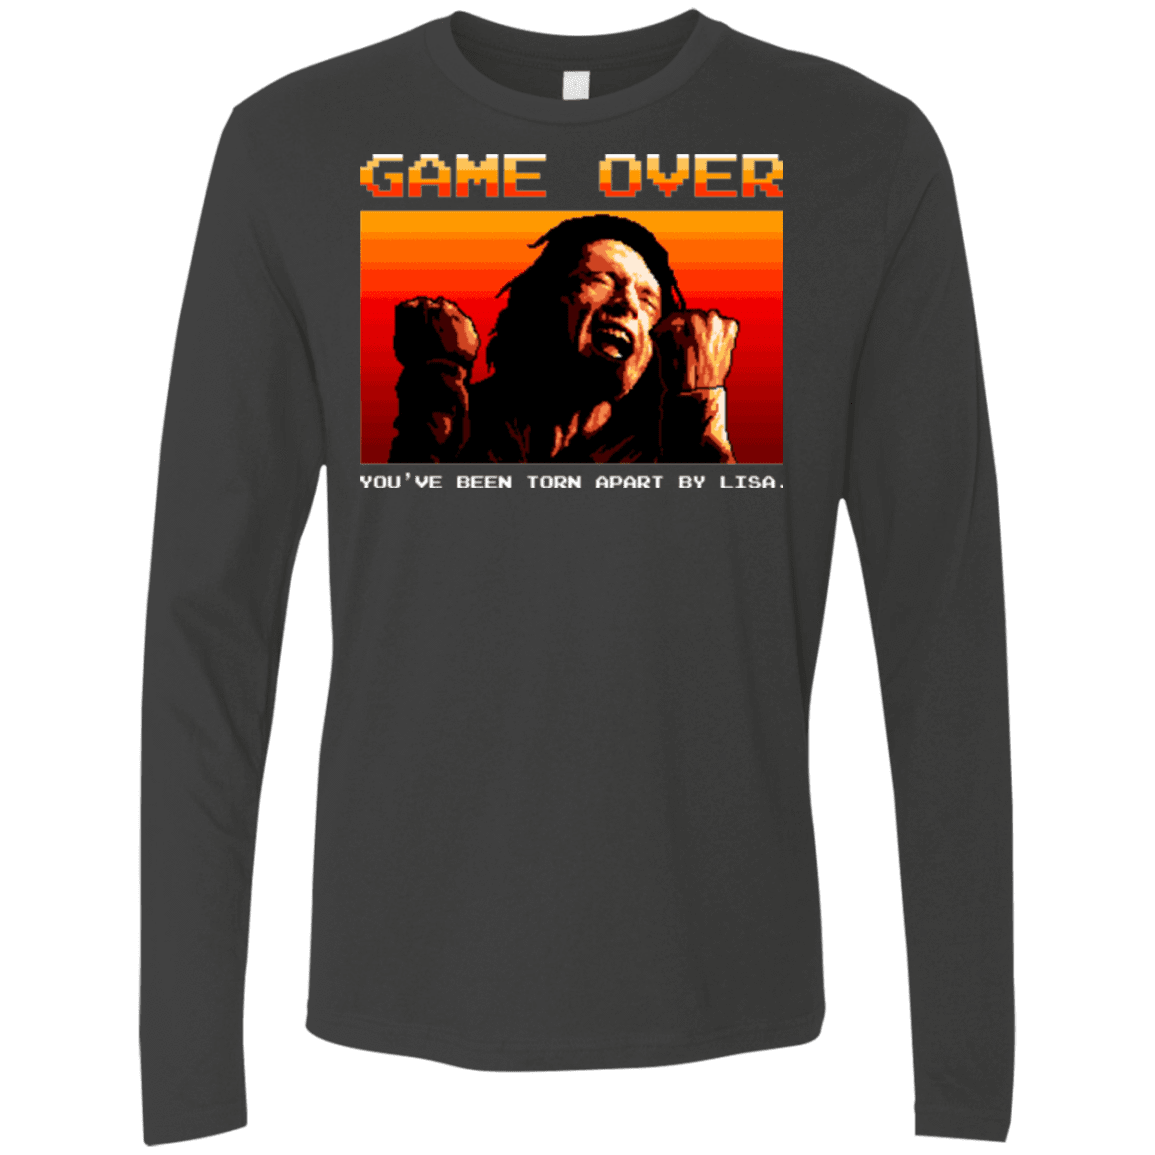 T-Shirts Heavy Metal / Small Game Over Men's Premium Long Sleeve